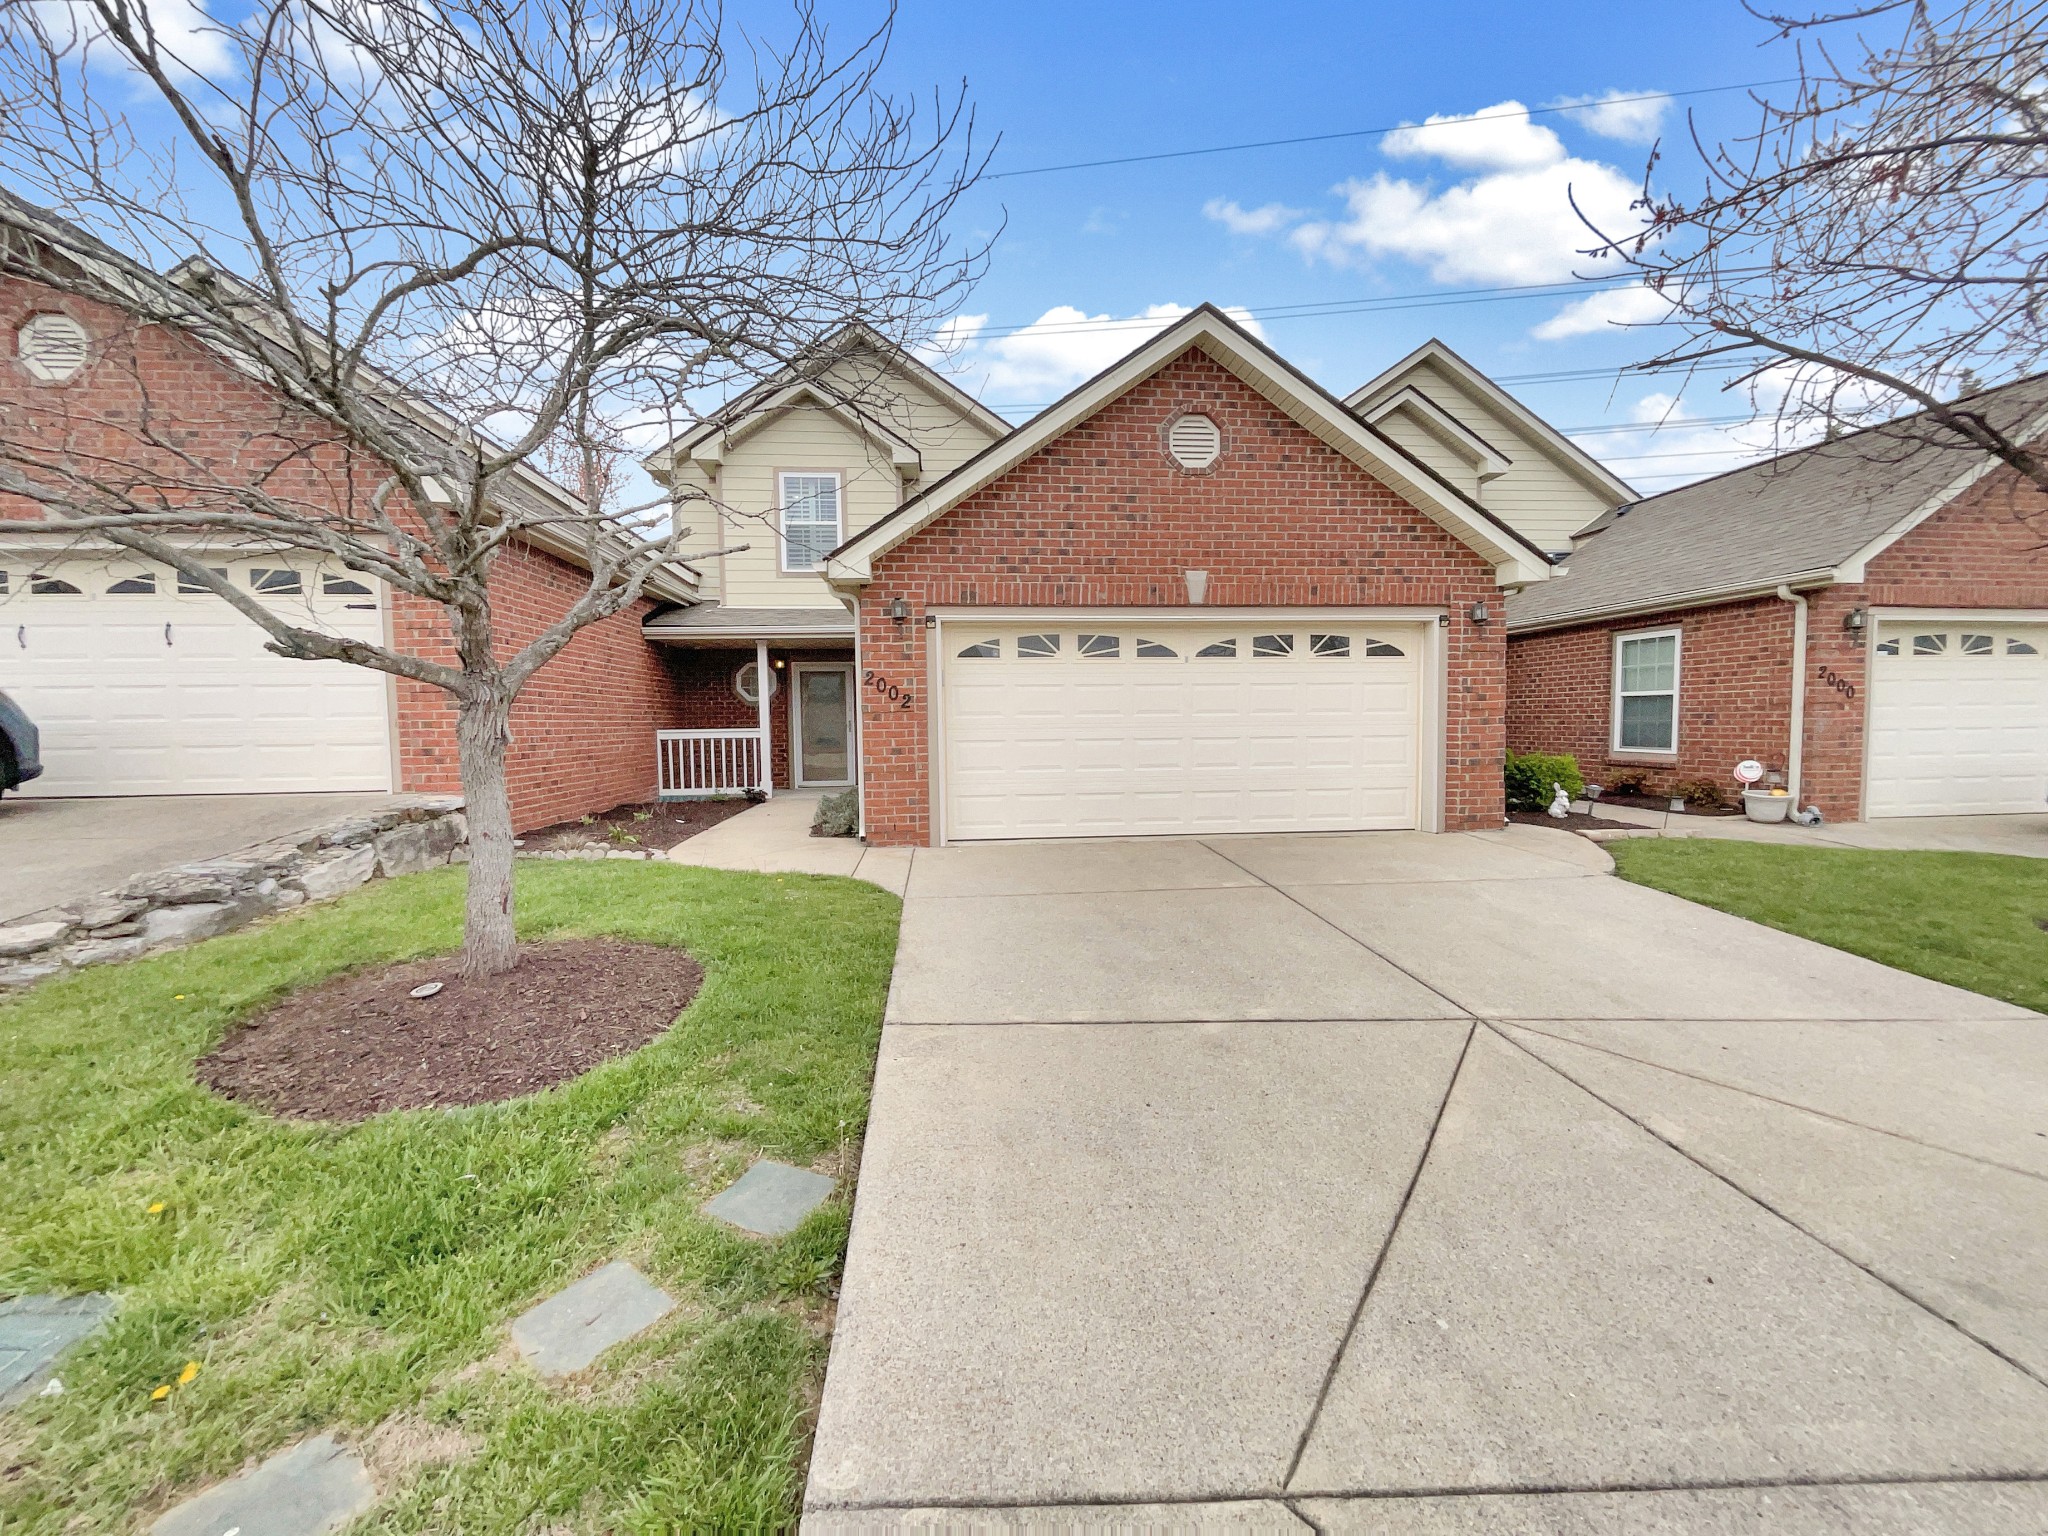 View Spring Hill, TN 37174 townhome